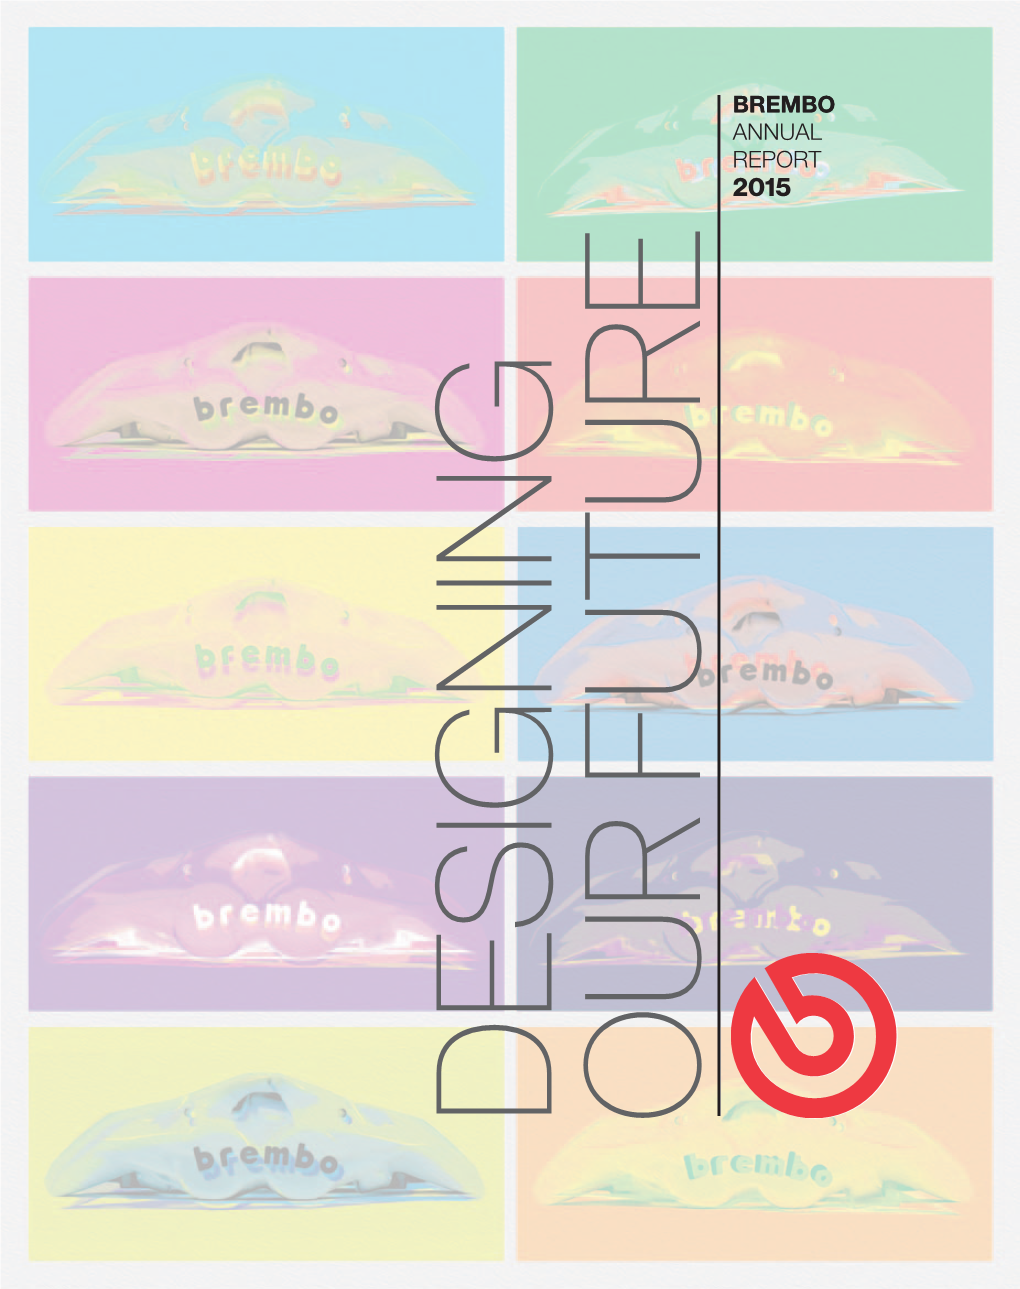 BREMBO ANNUAL REPORT 2015 If It Weren’T a Brake It Would Be a Sculpture Worthy of Any Museum of Modern Art